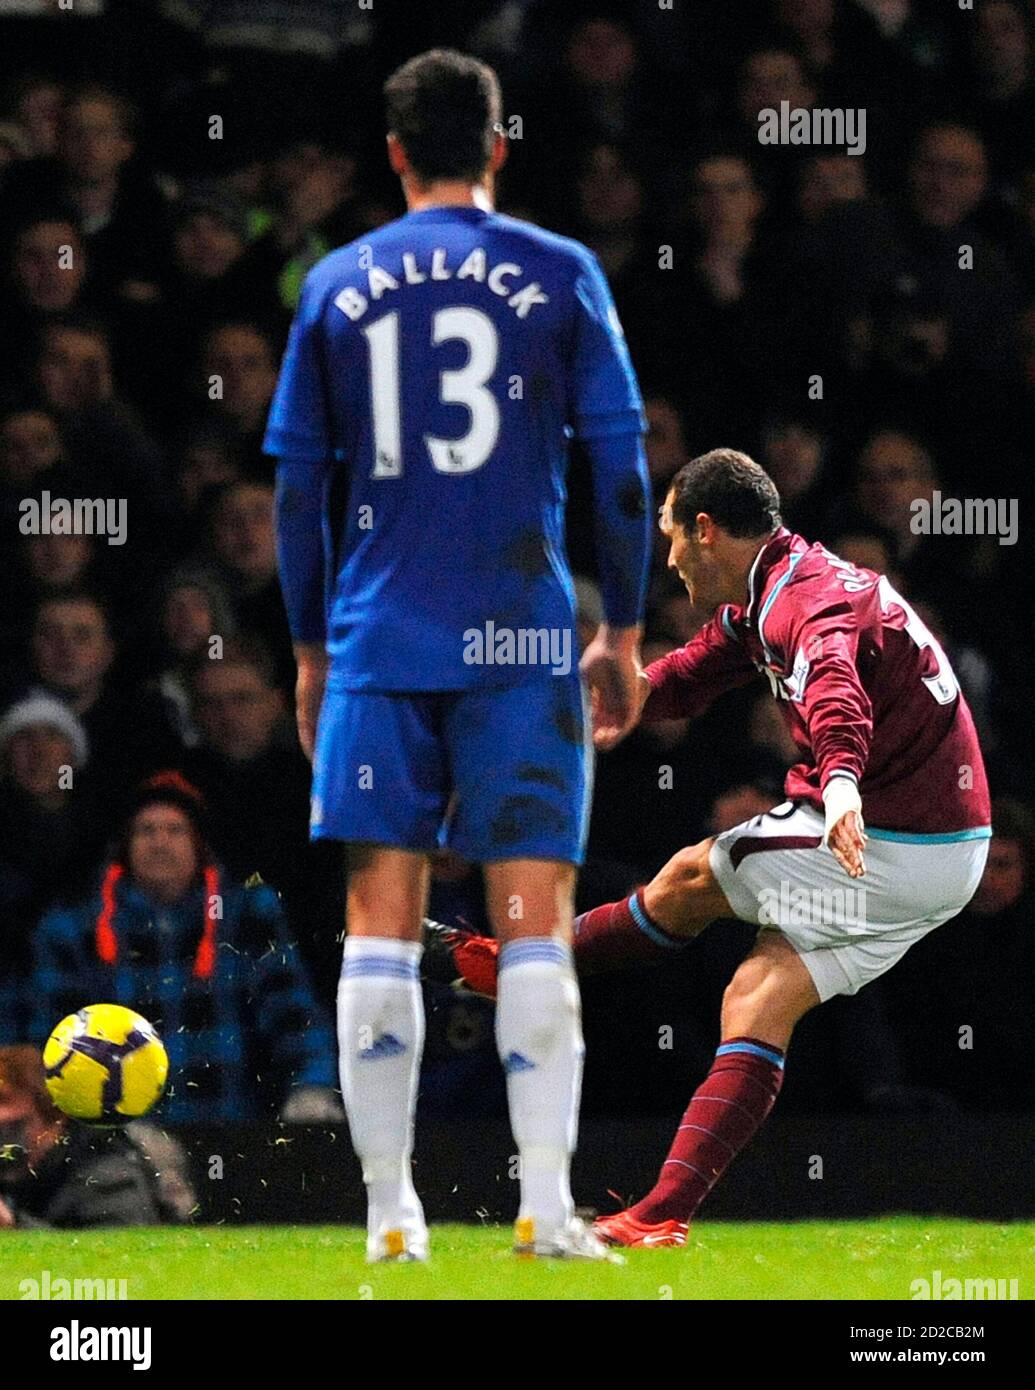 West Ham's Alessandro Diamanti (R) scores against Chelsea as Chelsea's  Michael Ballack looks on during their English Premier League soccer match  at Upton Park in London December 20, 2009. REUTERS/Toby Melville (BRITAIN -